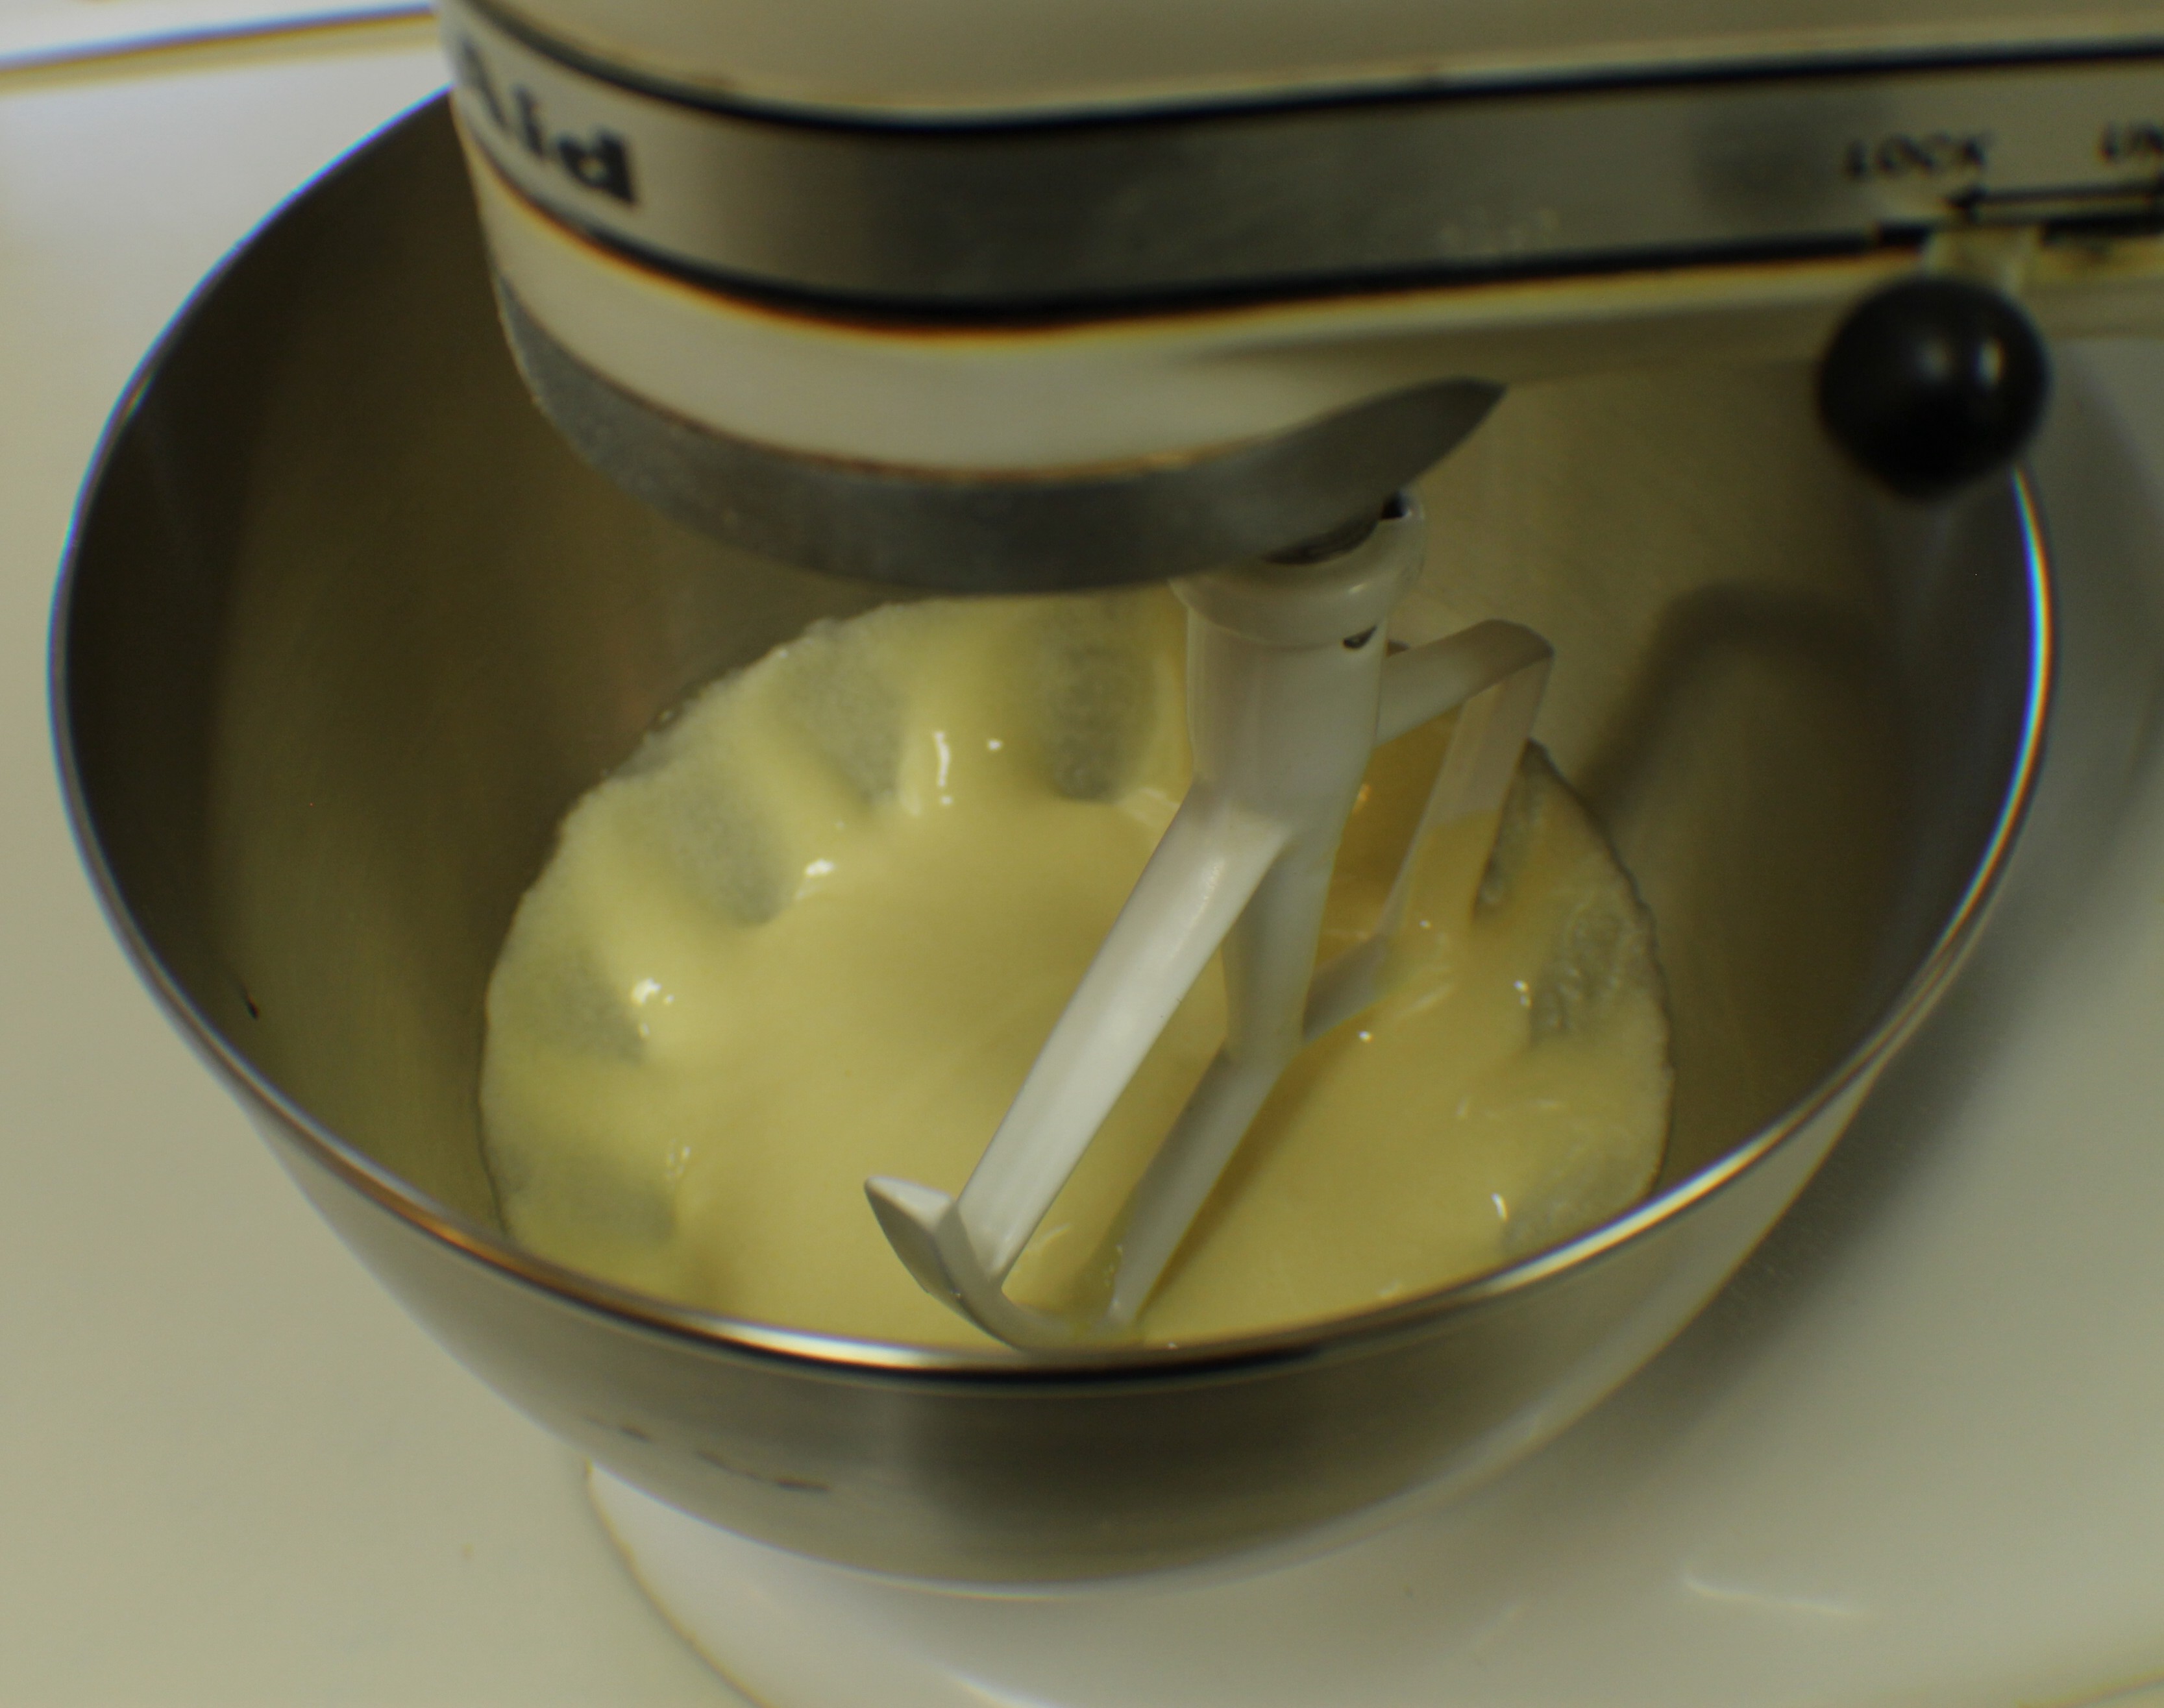 Combine egg yolks and sugar in mixer, beat well